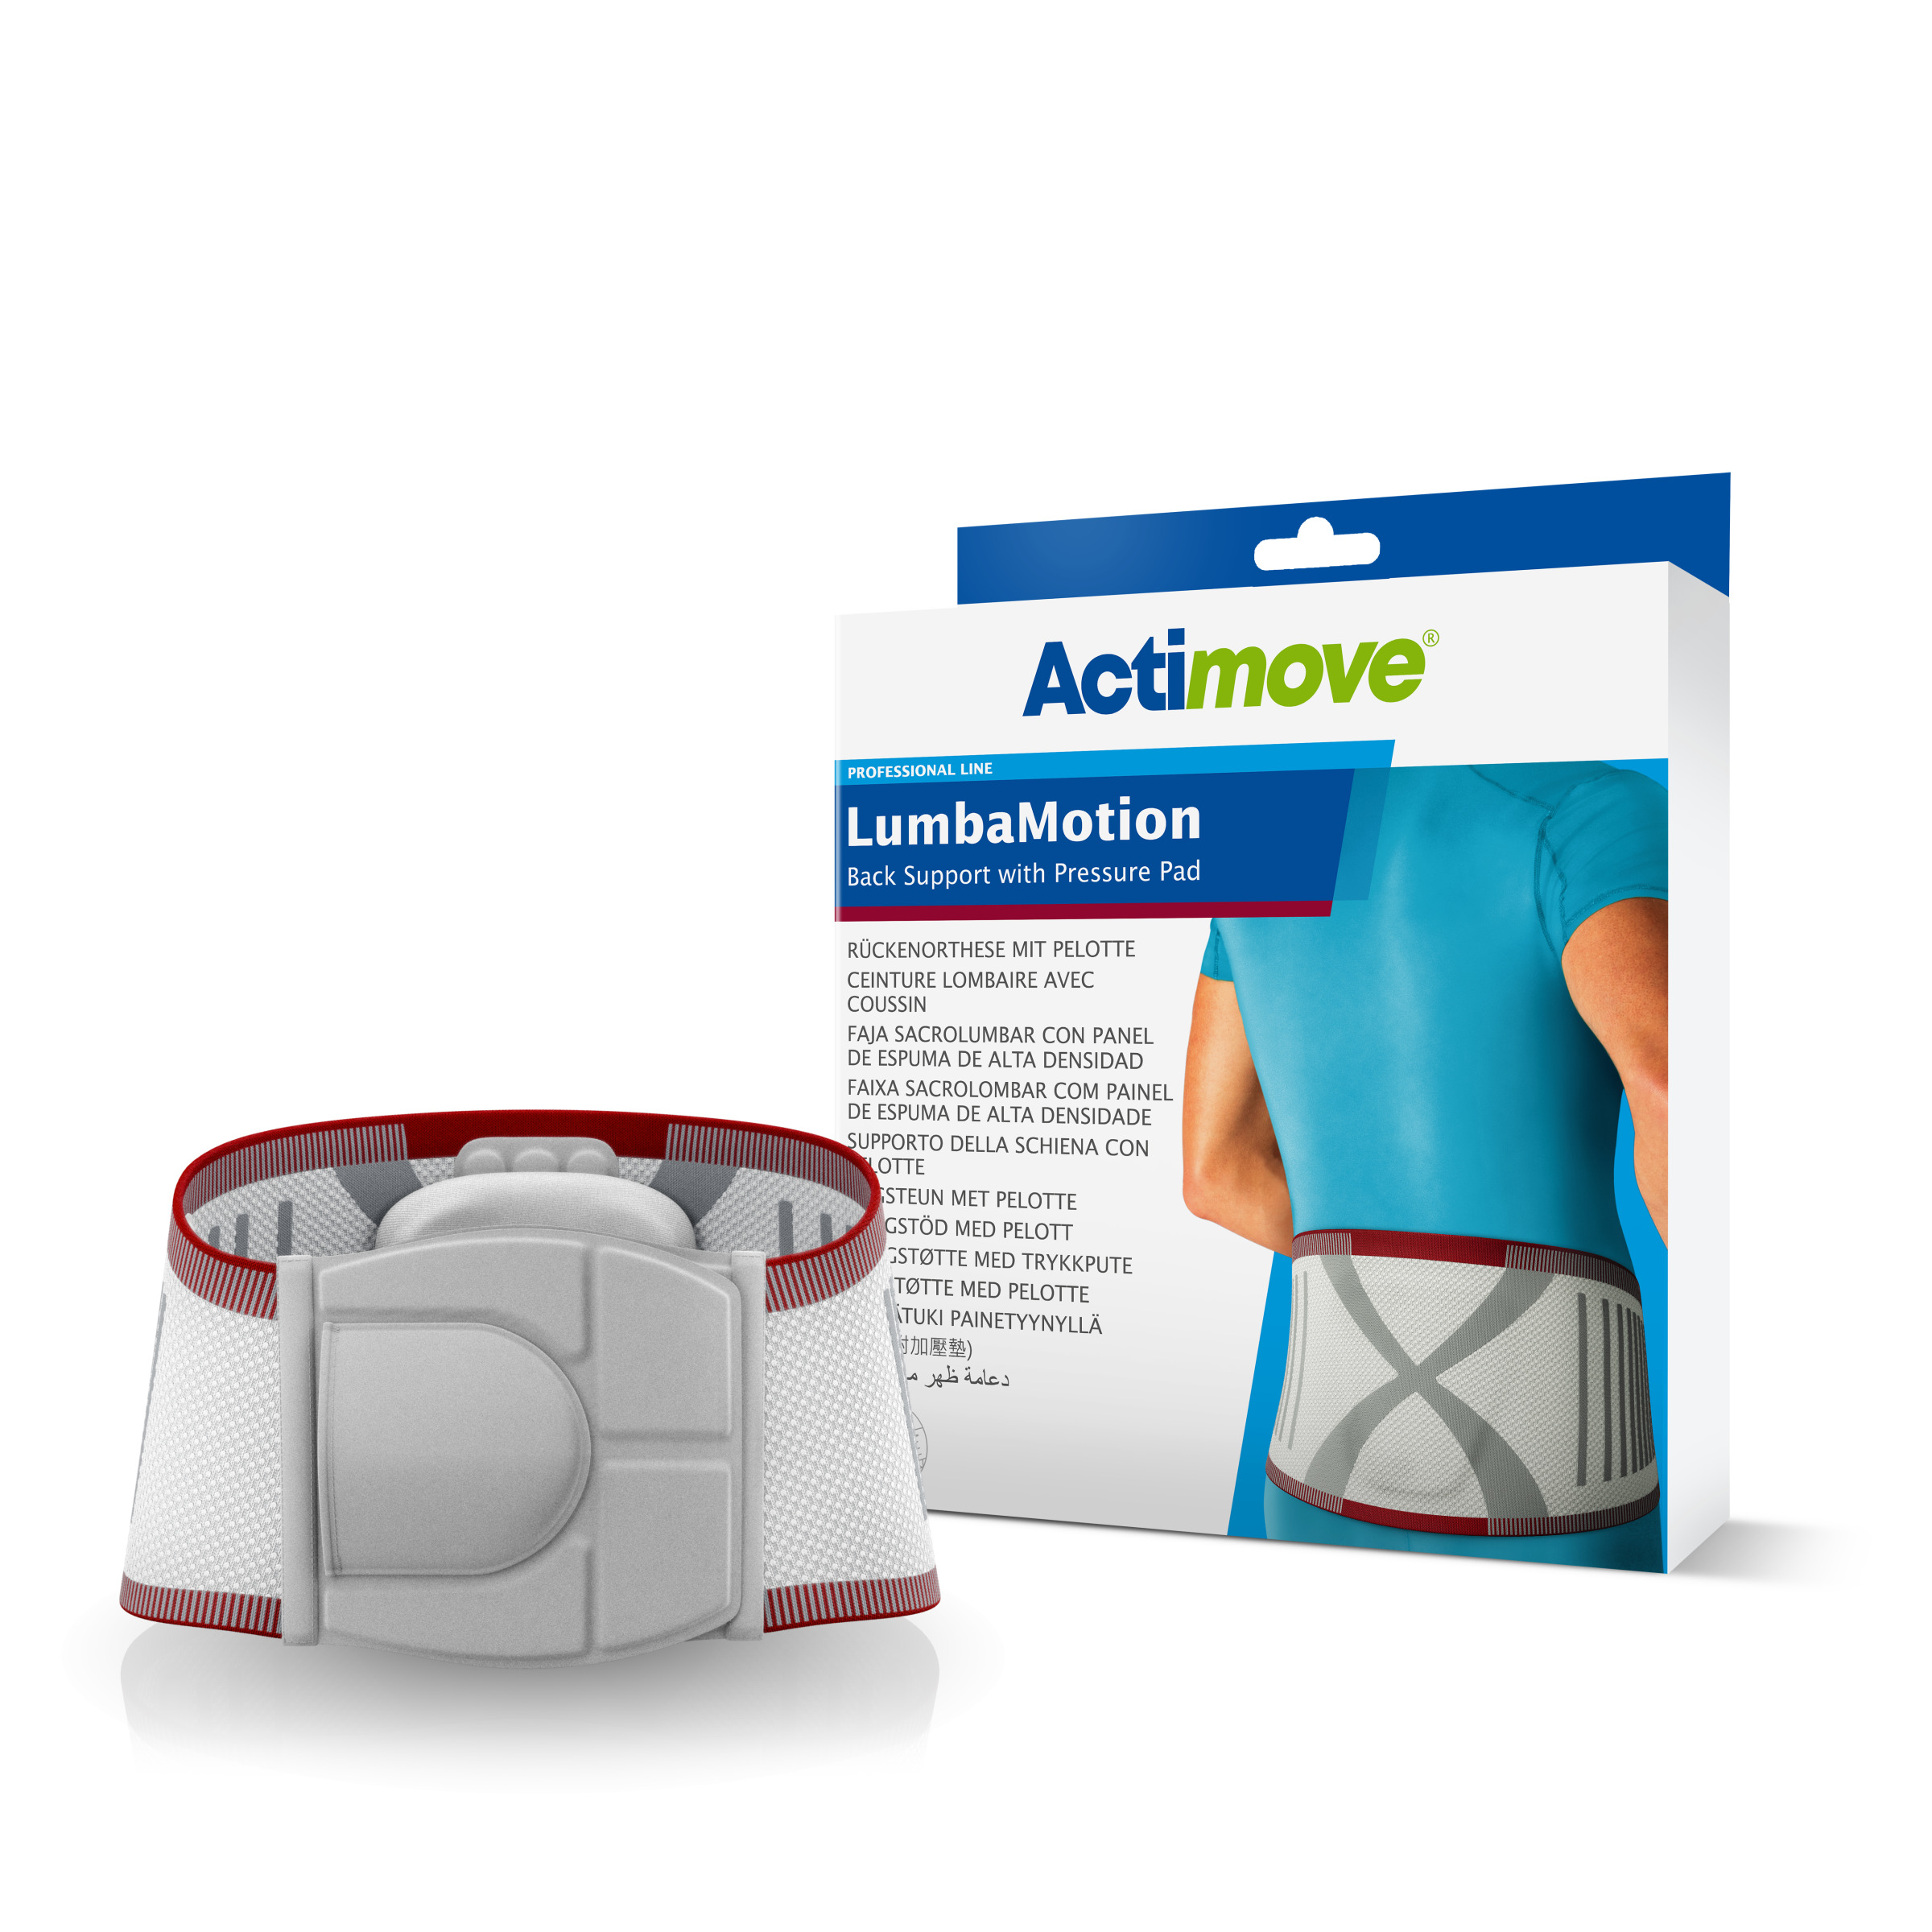 https://medical.essityusa.com/fileadmin/z-brands/Actimove/Medical.Essity_US/Product_Images/Actimove_LumbaMotion_Back_Support_with_Pressure_Pad_White_X-Large.jpg